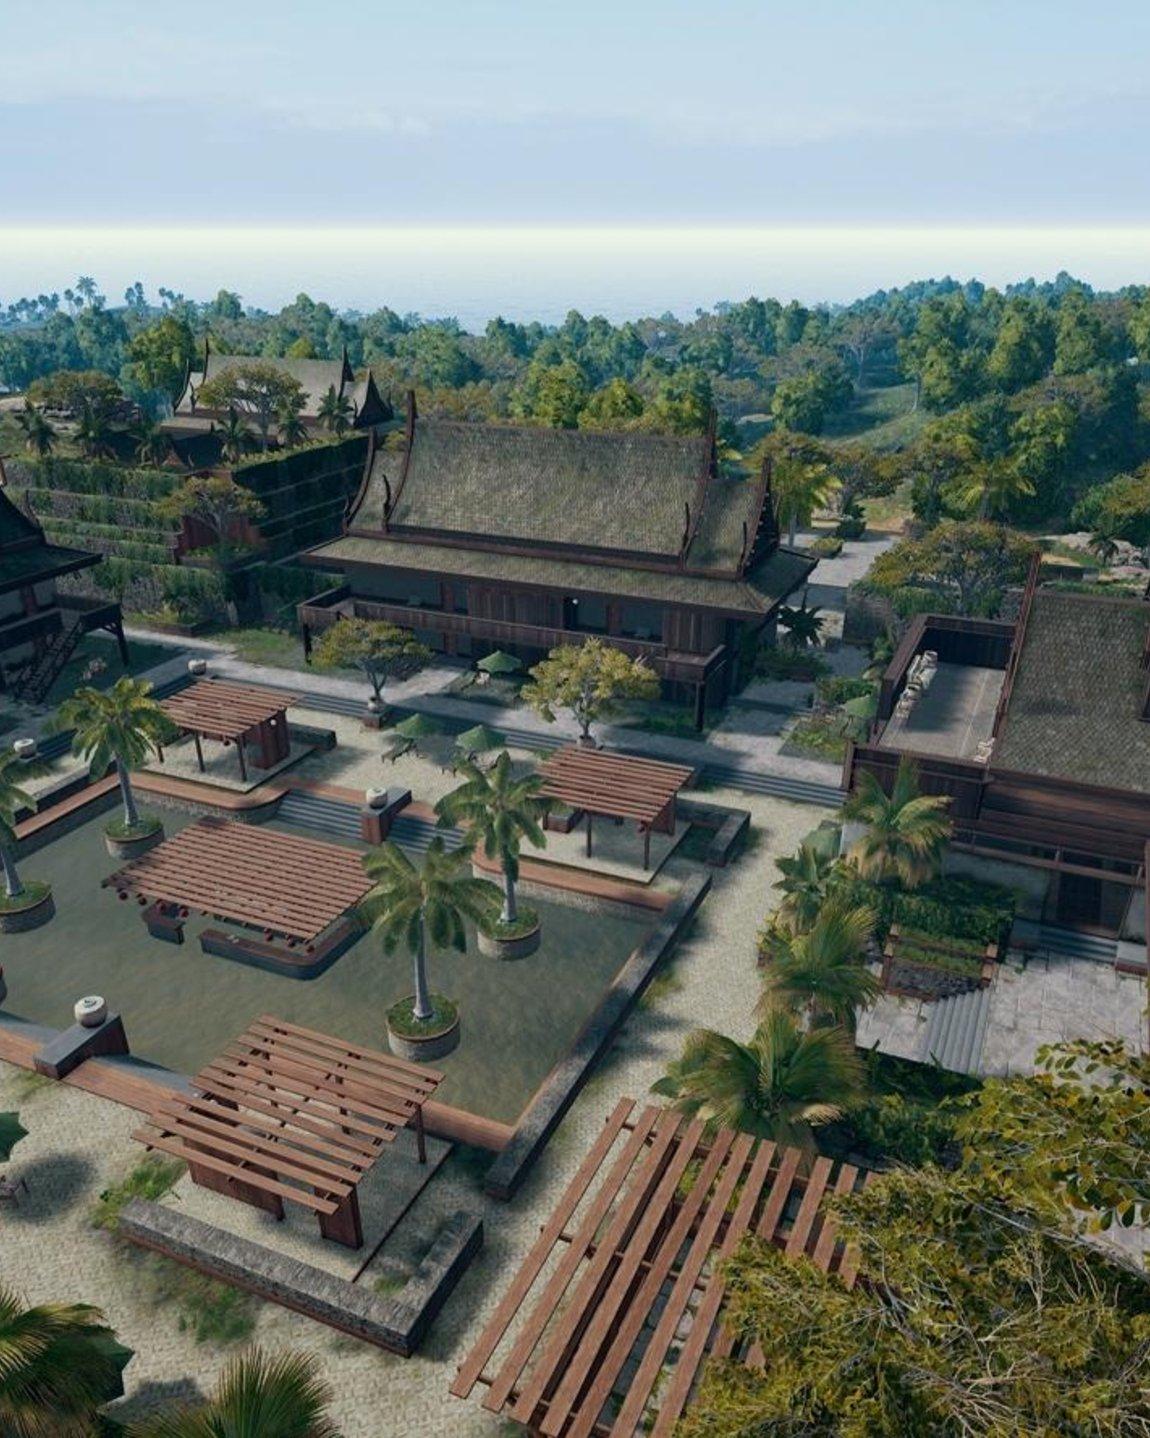 PUBG's new Sanhok map: What do the pro players think?